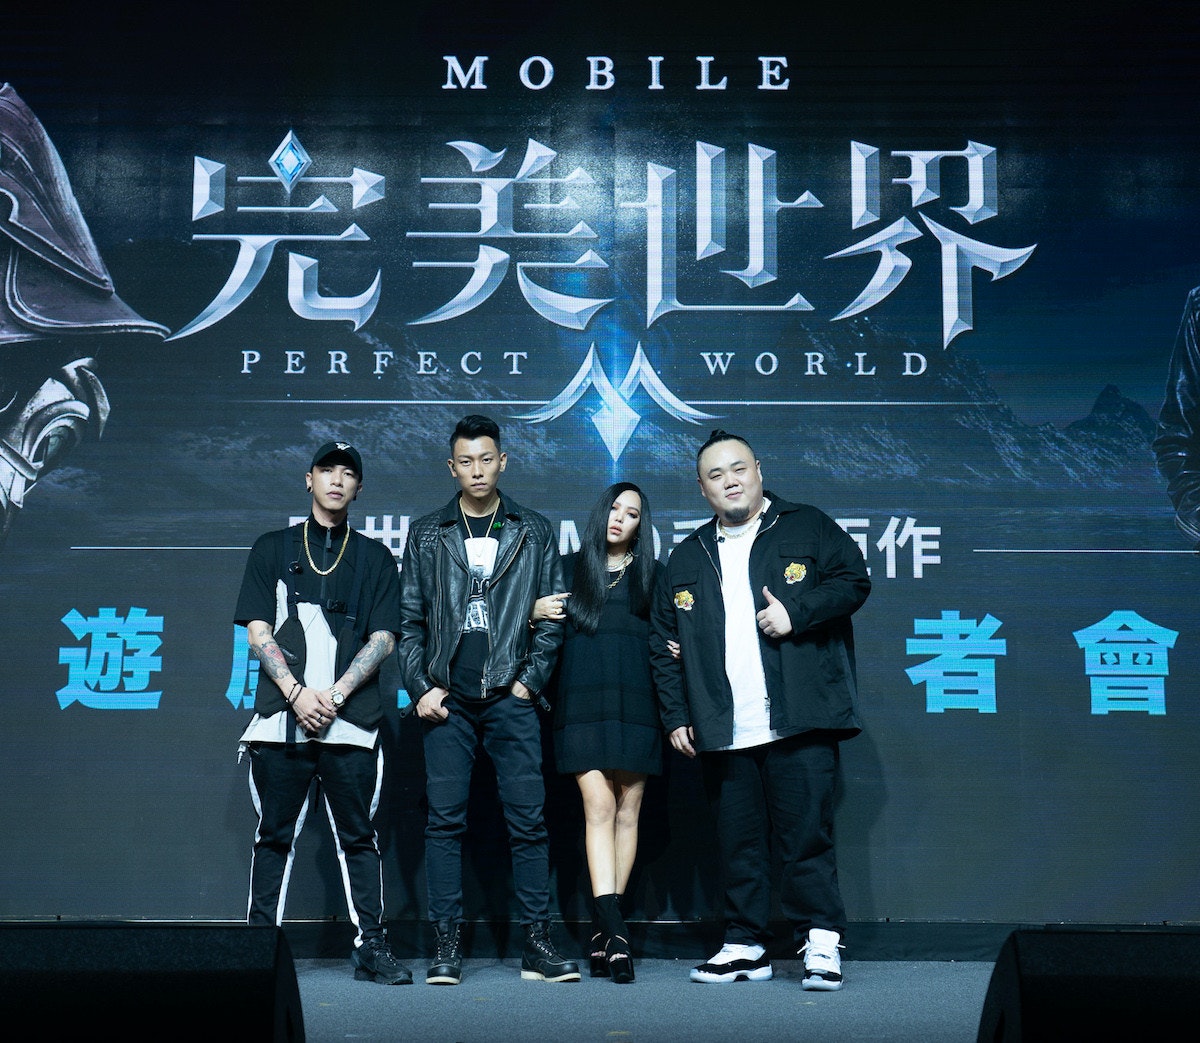 A-Mei, E-so, Muta, 安那, MJ116, Entertainment, Kiss, China Times, Dance, News, stage, Stage, Font, Performance, Event, Company